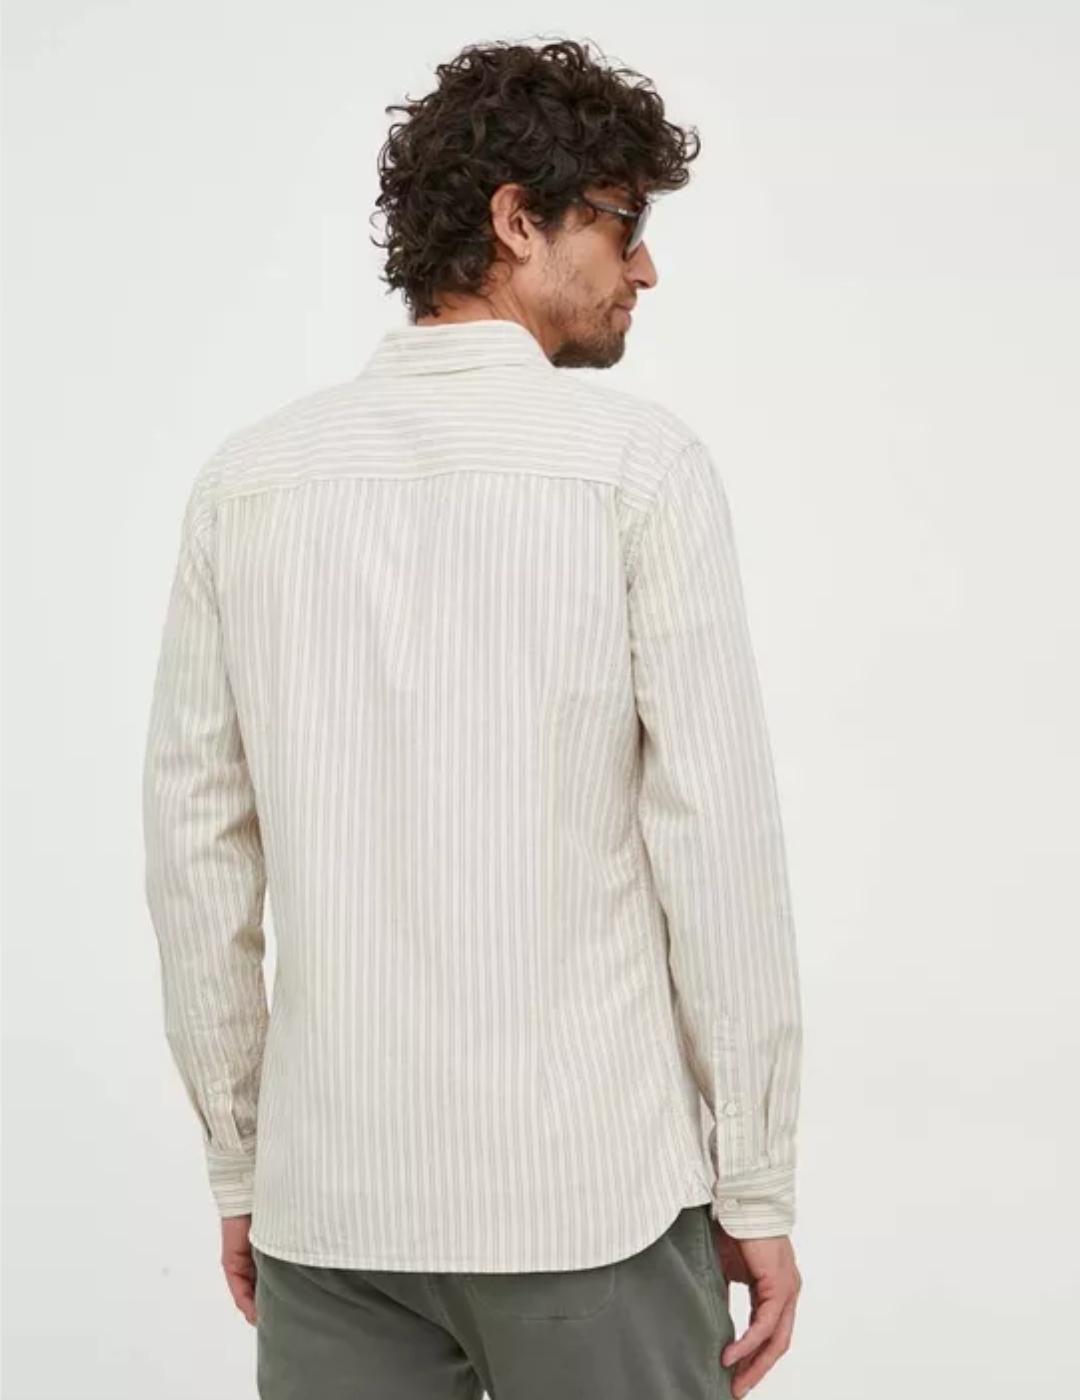 Camisa Chester beige hombre pepe jeans